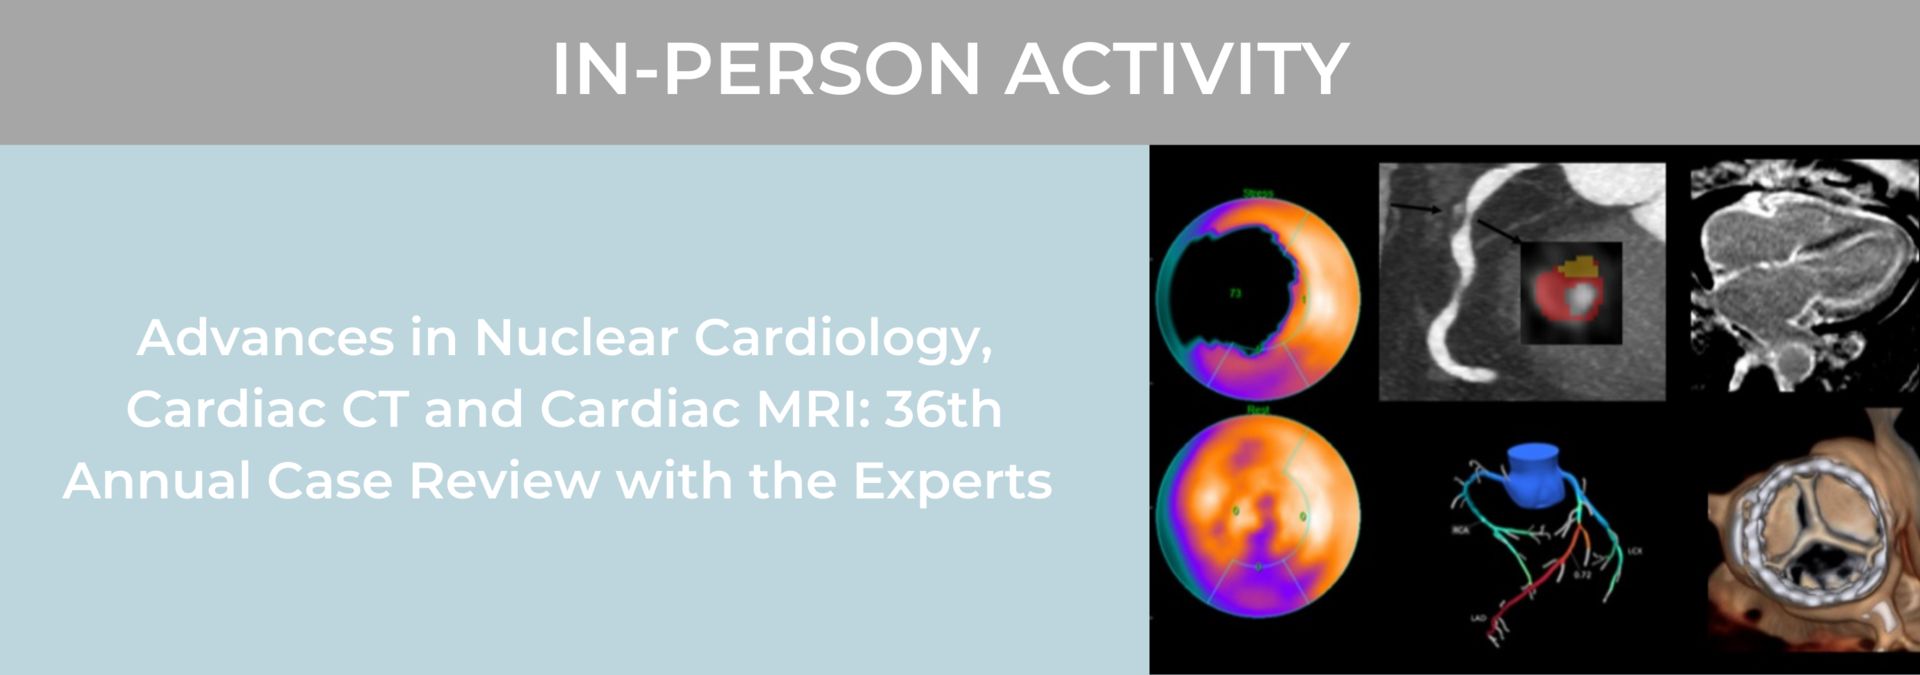 Advances in Nuclear Cardiology, Cardiac CT and Cardiac MRI: 36th Annual Case Review with the Experts, Los Angeles, California, United States